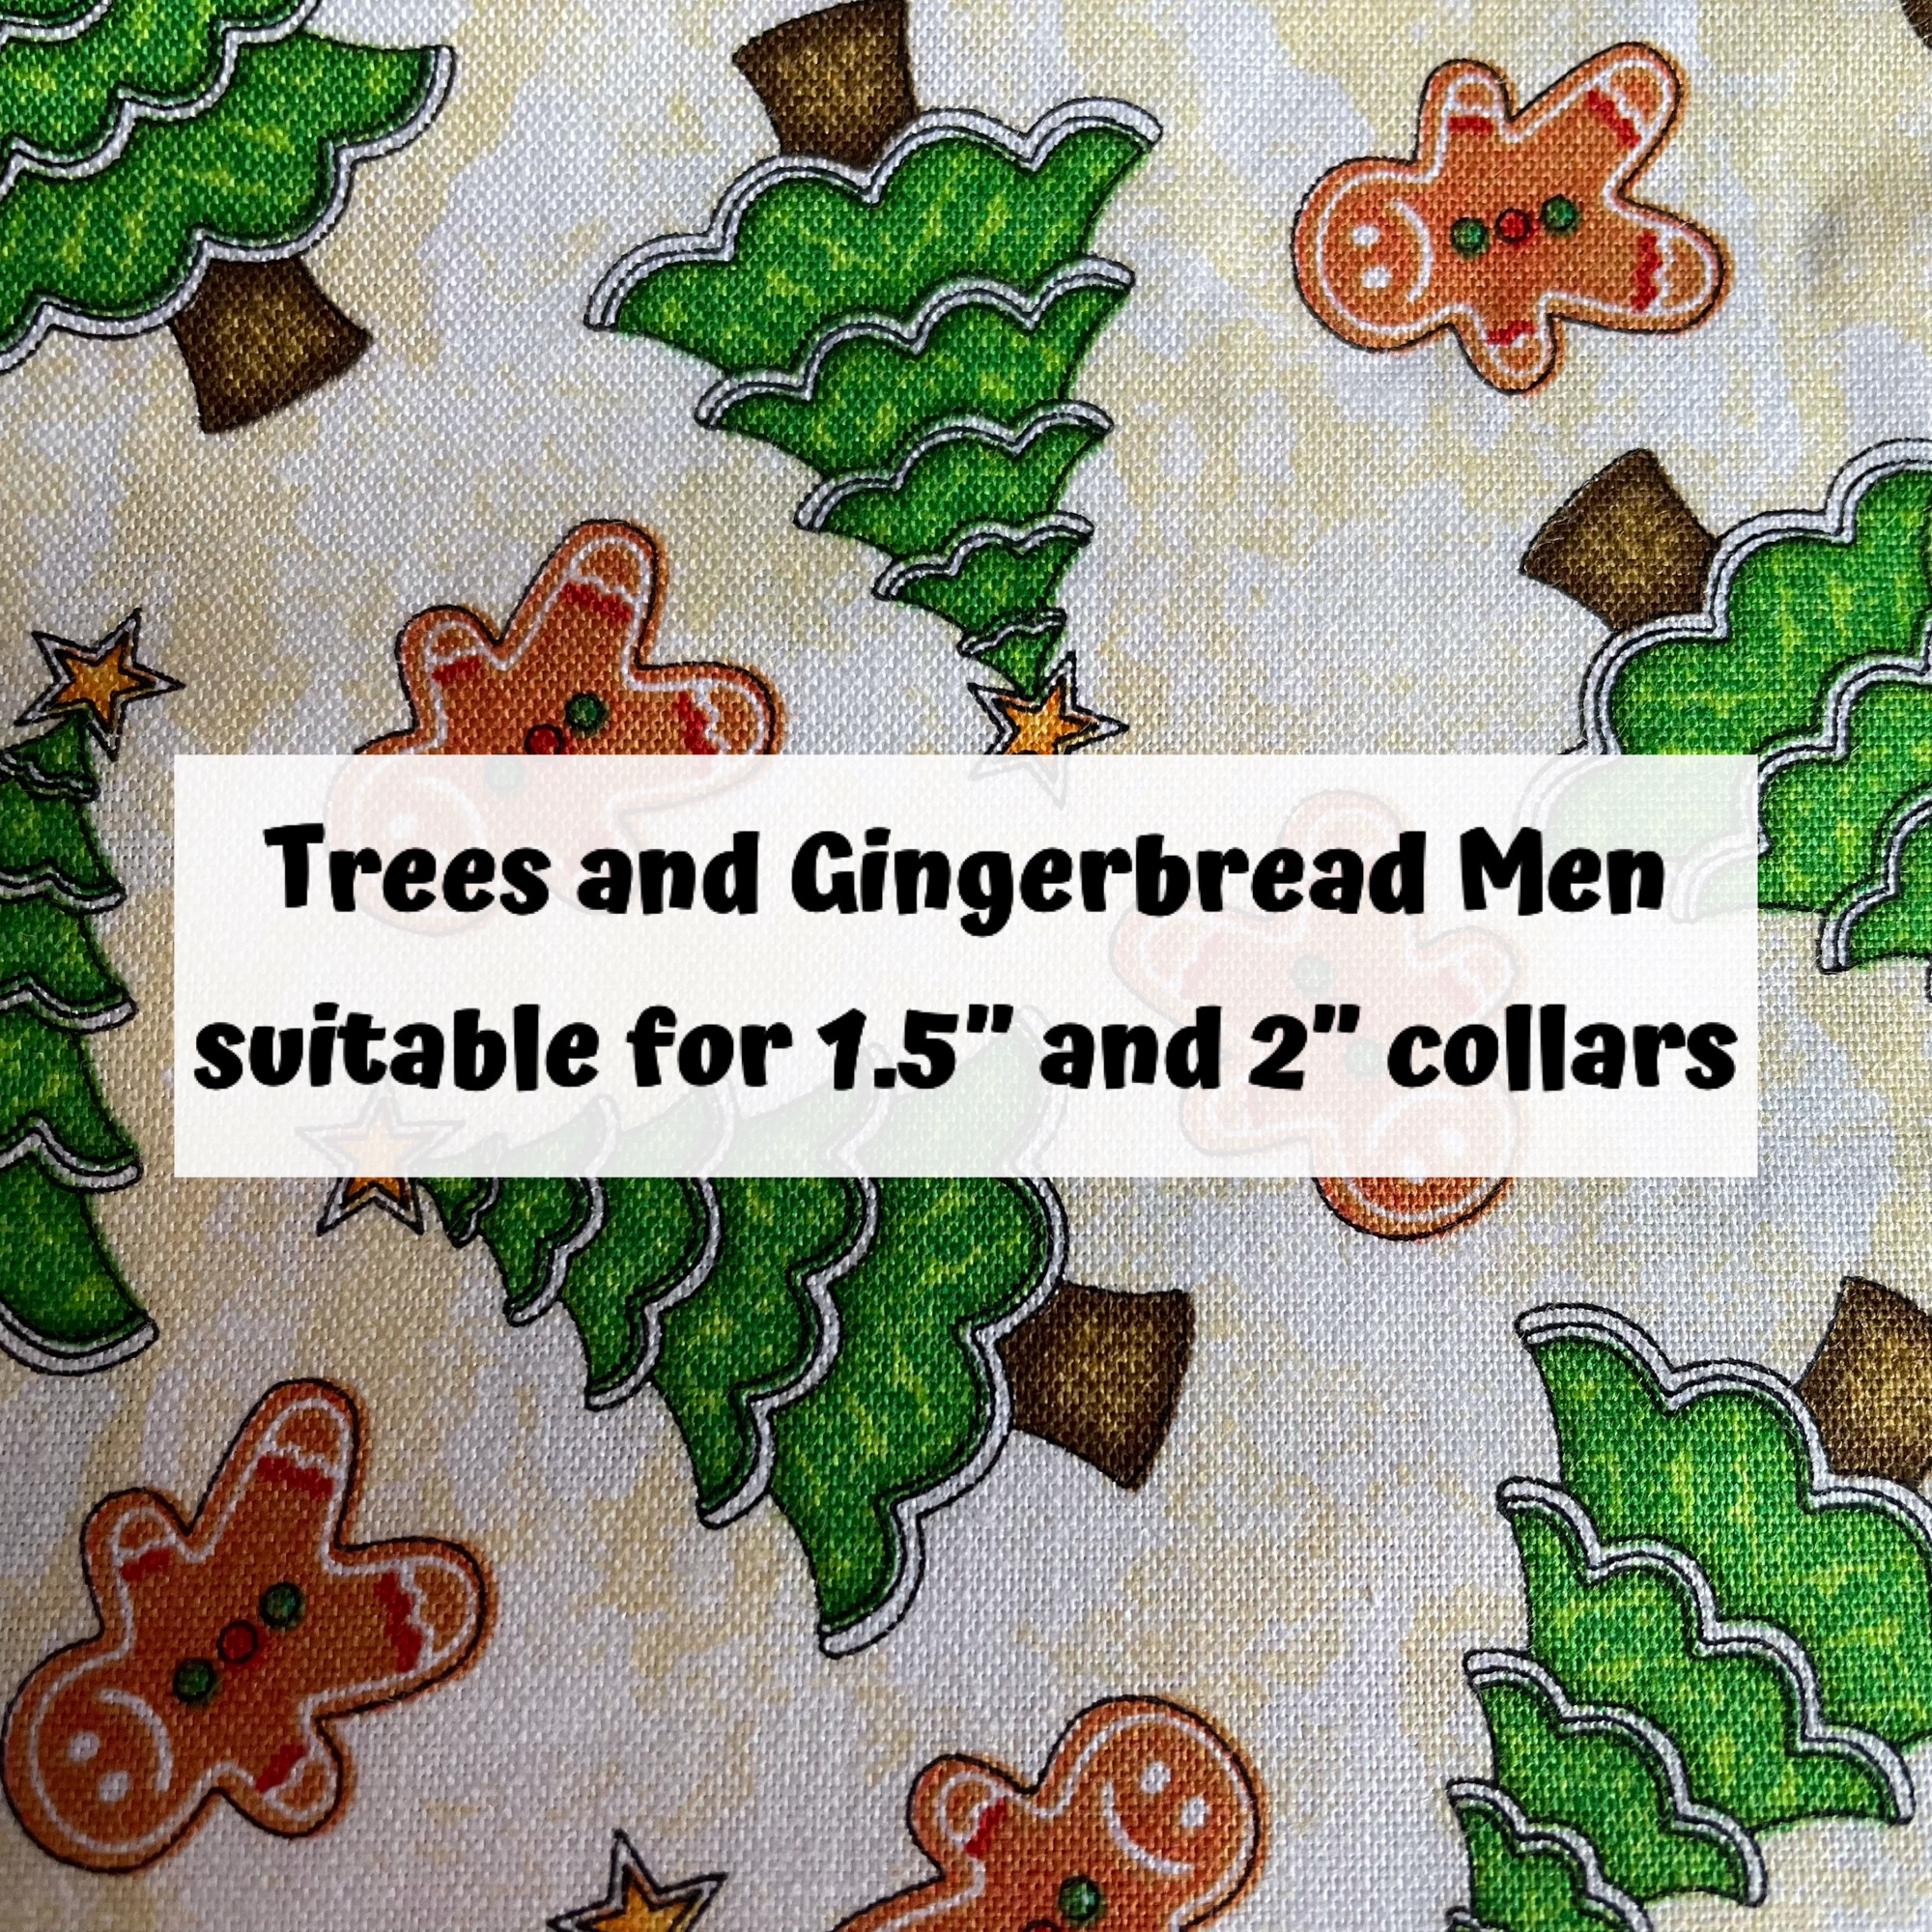 Trees and Gingerbread Men